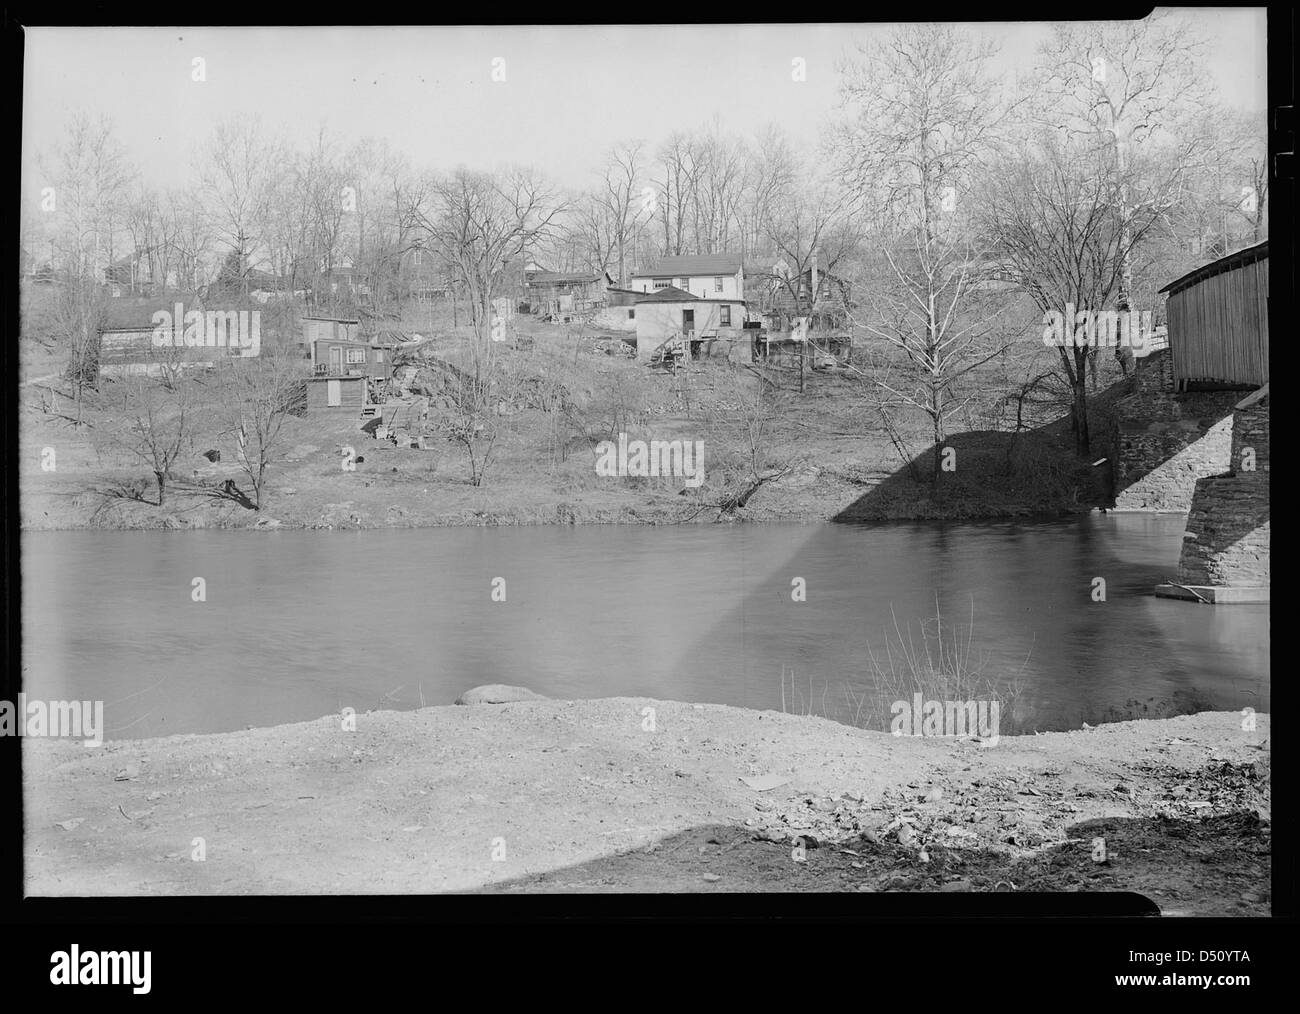 Sunnyside - near covered bridge over Conestoga Creek - dump on one side - shacks on opposite bank - miscellaneous low-paid workers, 1936 Stock Photo